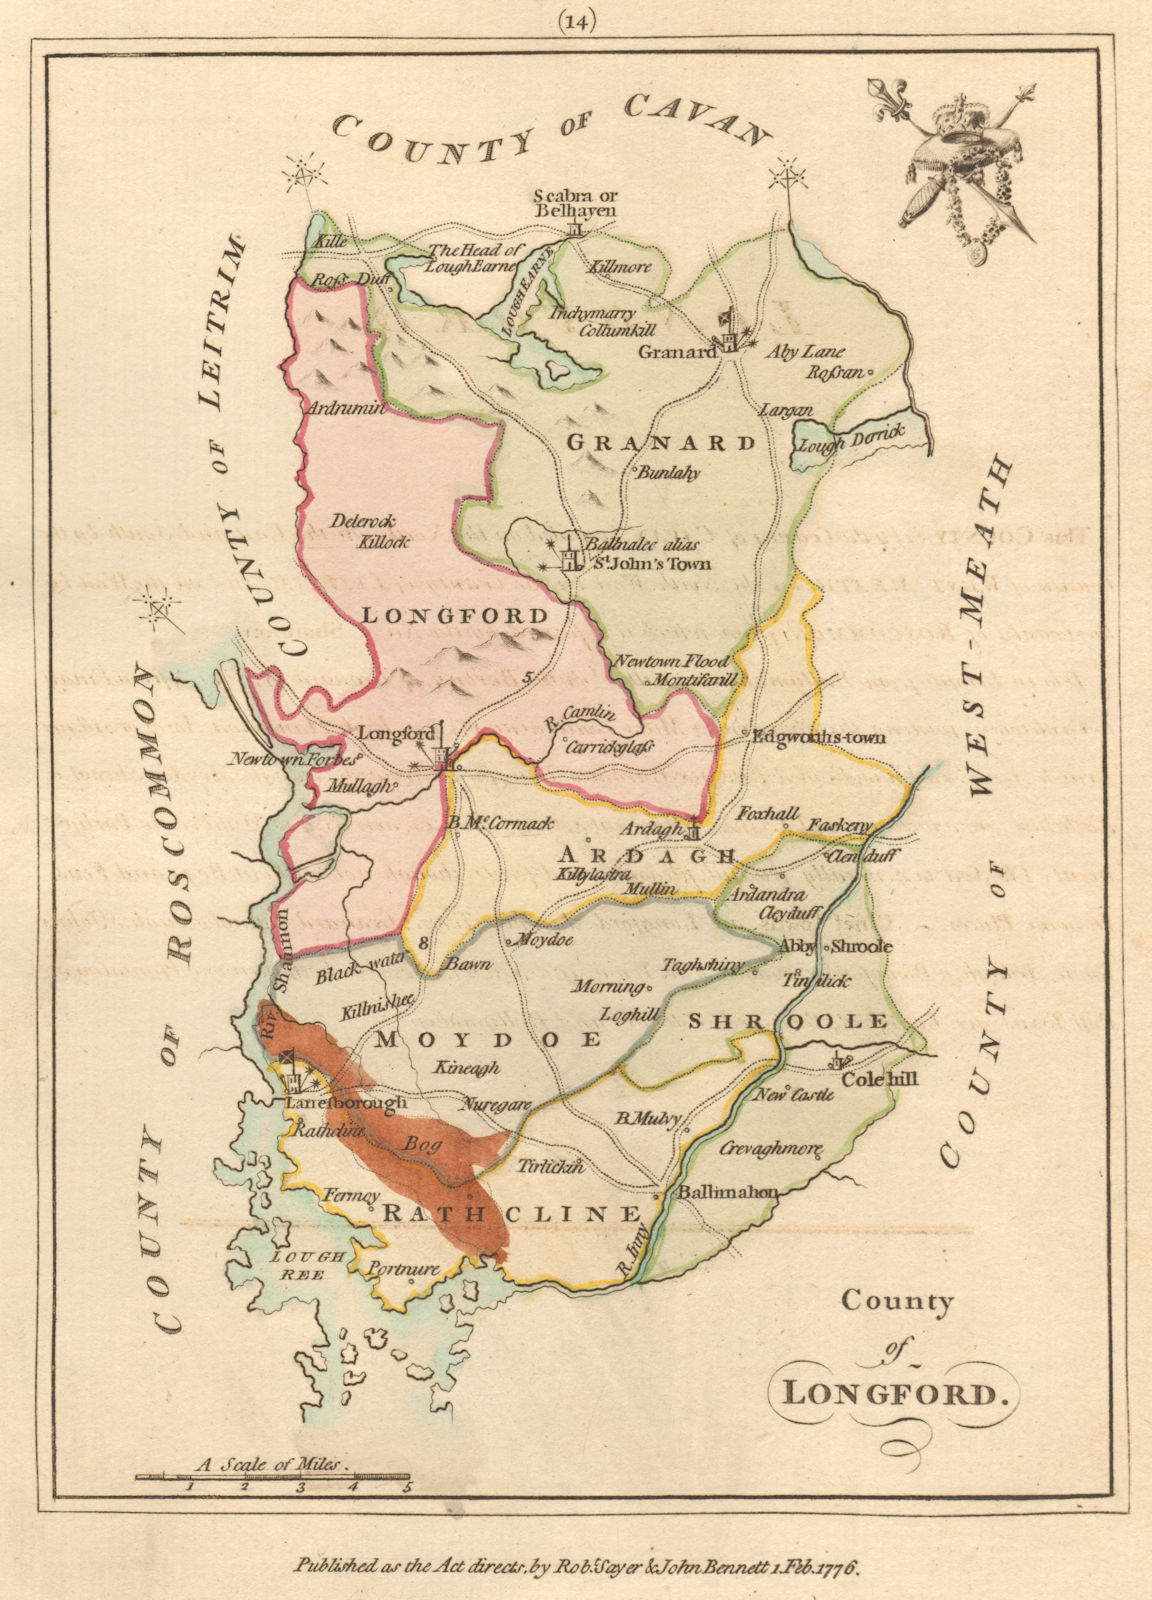 County of Longford, Leinster. Antique copperplate map by Scalé / Sayer 1776